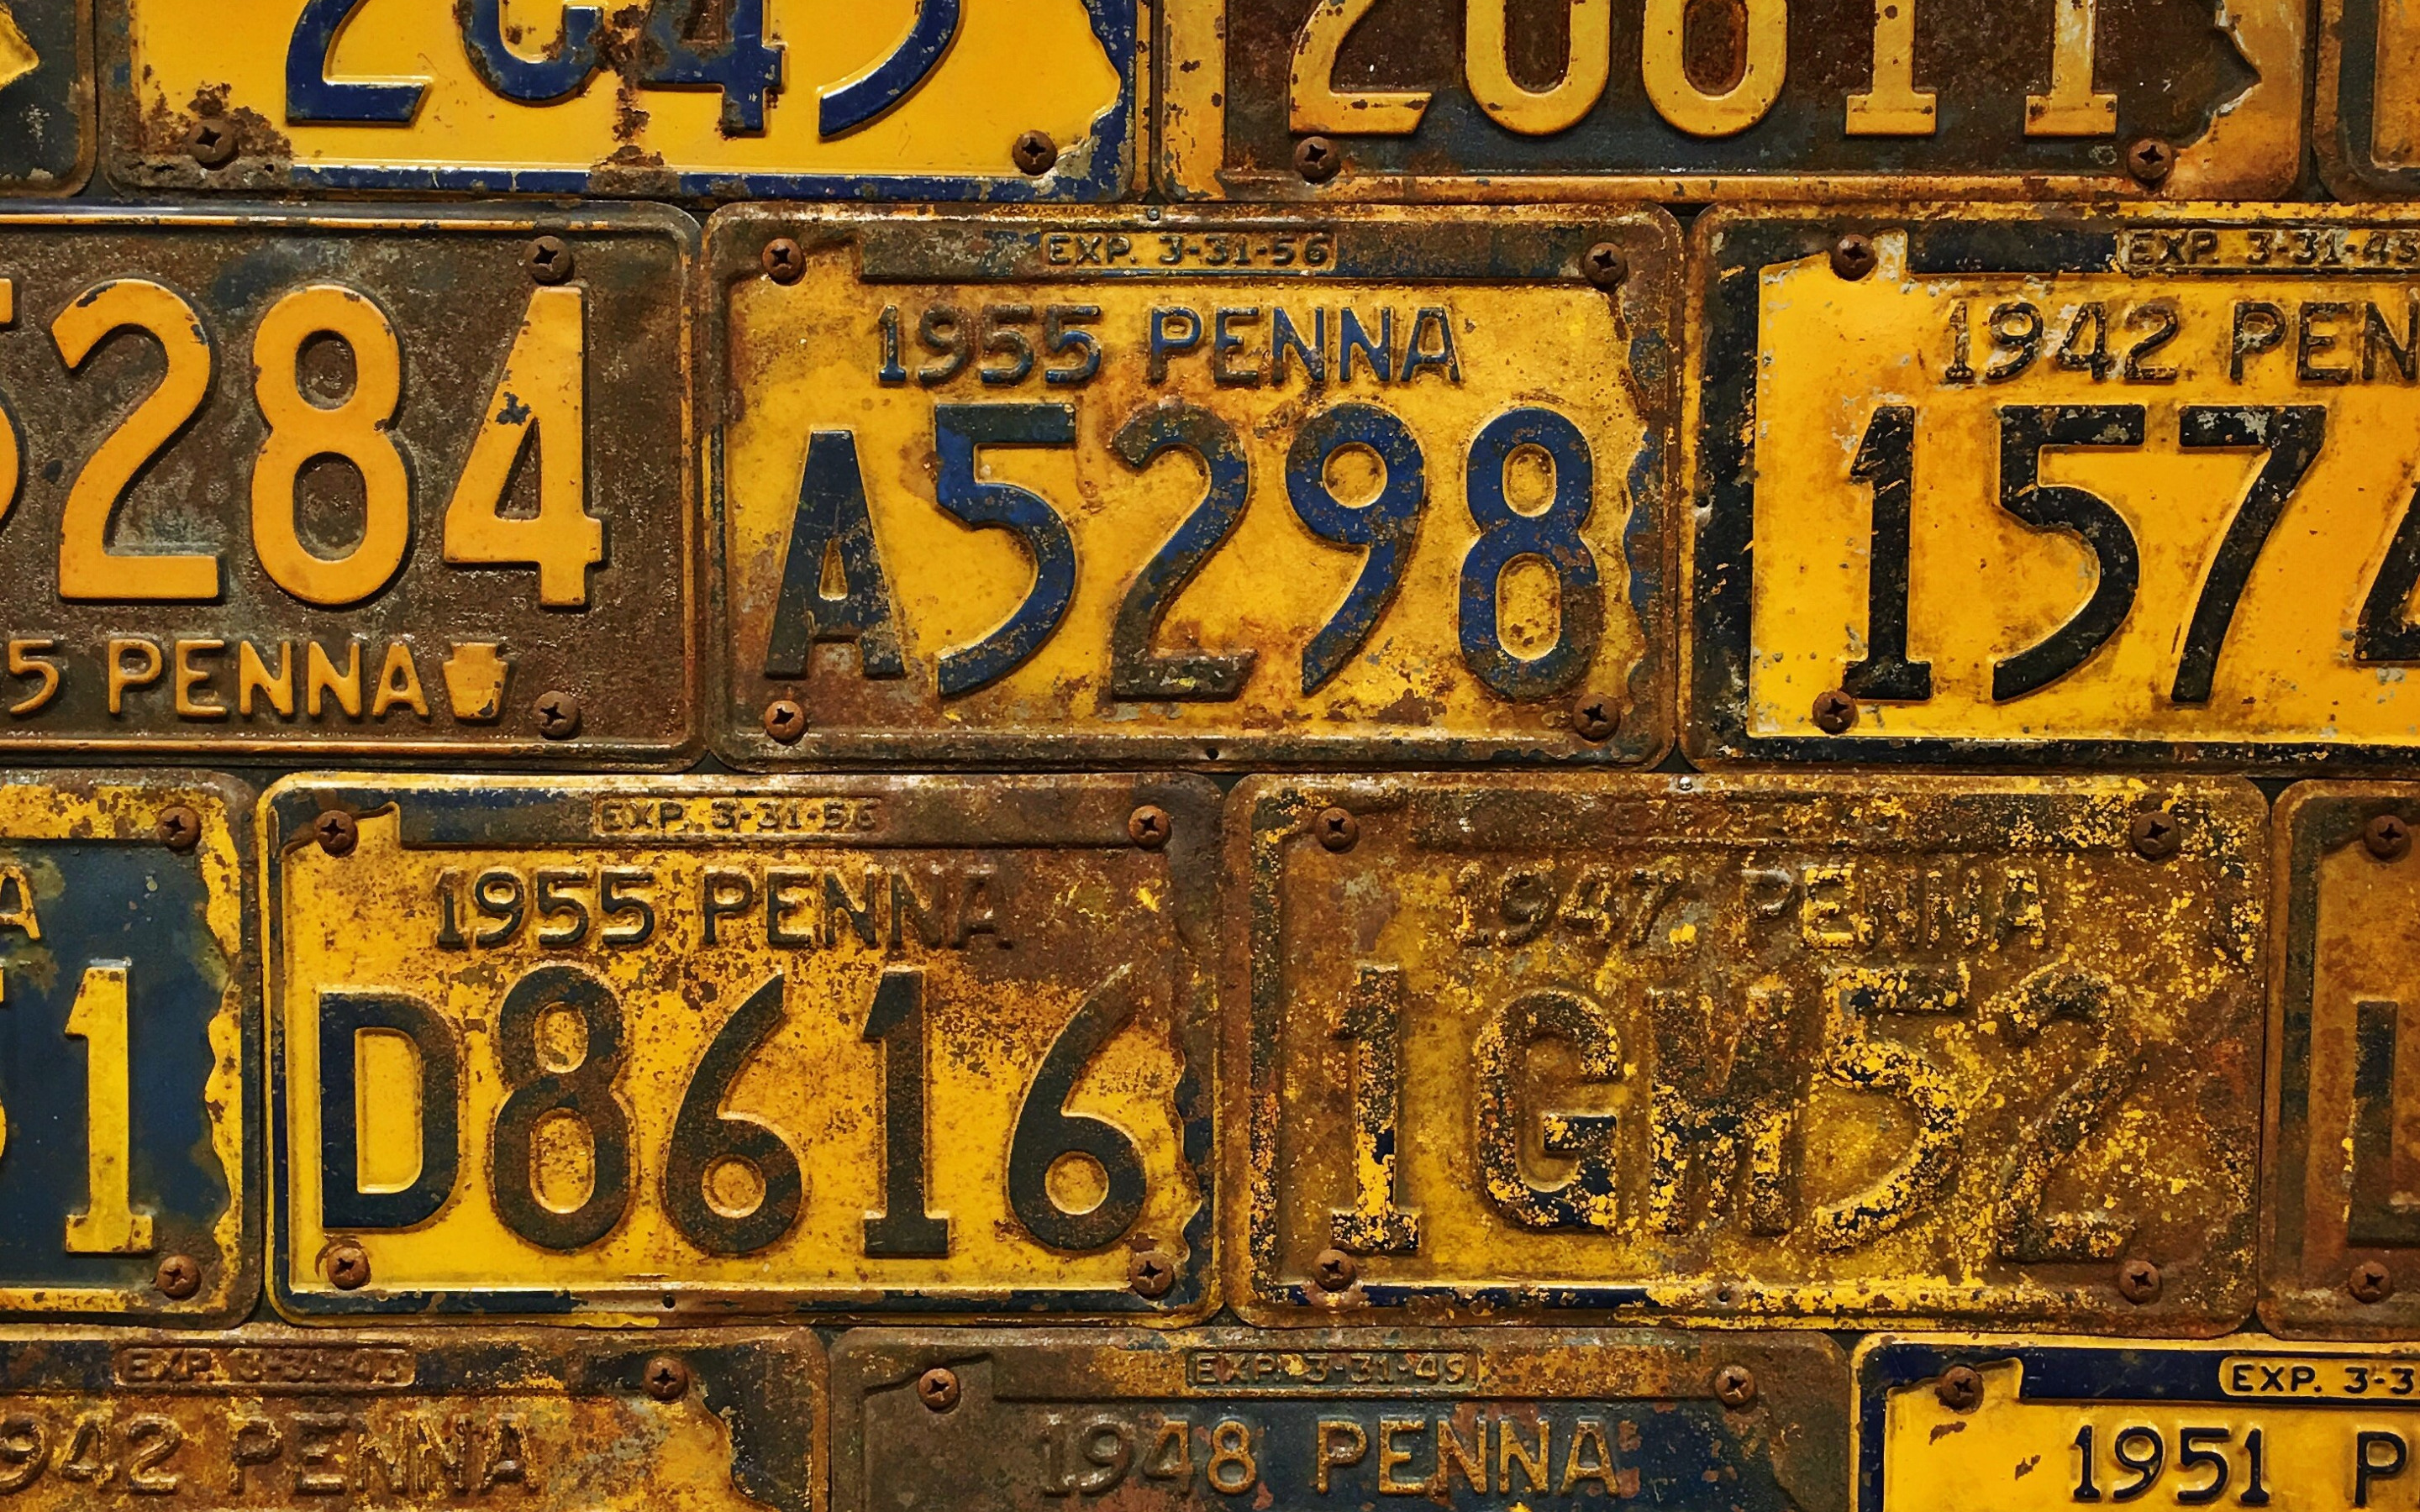 Download wallpaper old yellow car numbers, car numbers texture, license plate background, old iron background, background with license plates for desktop with resolution 2880x1800. High Quality HD picture wallpaper